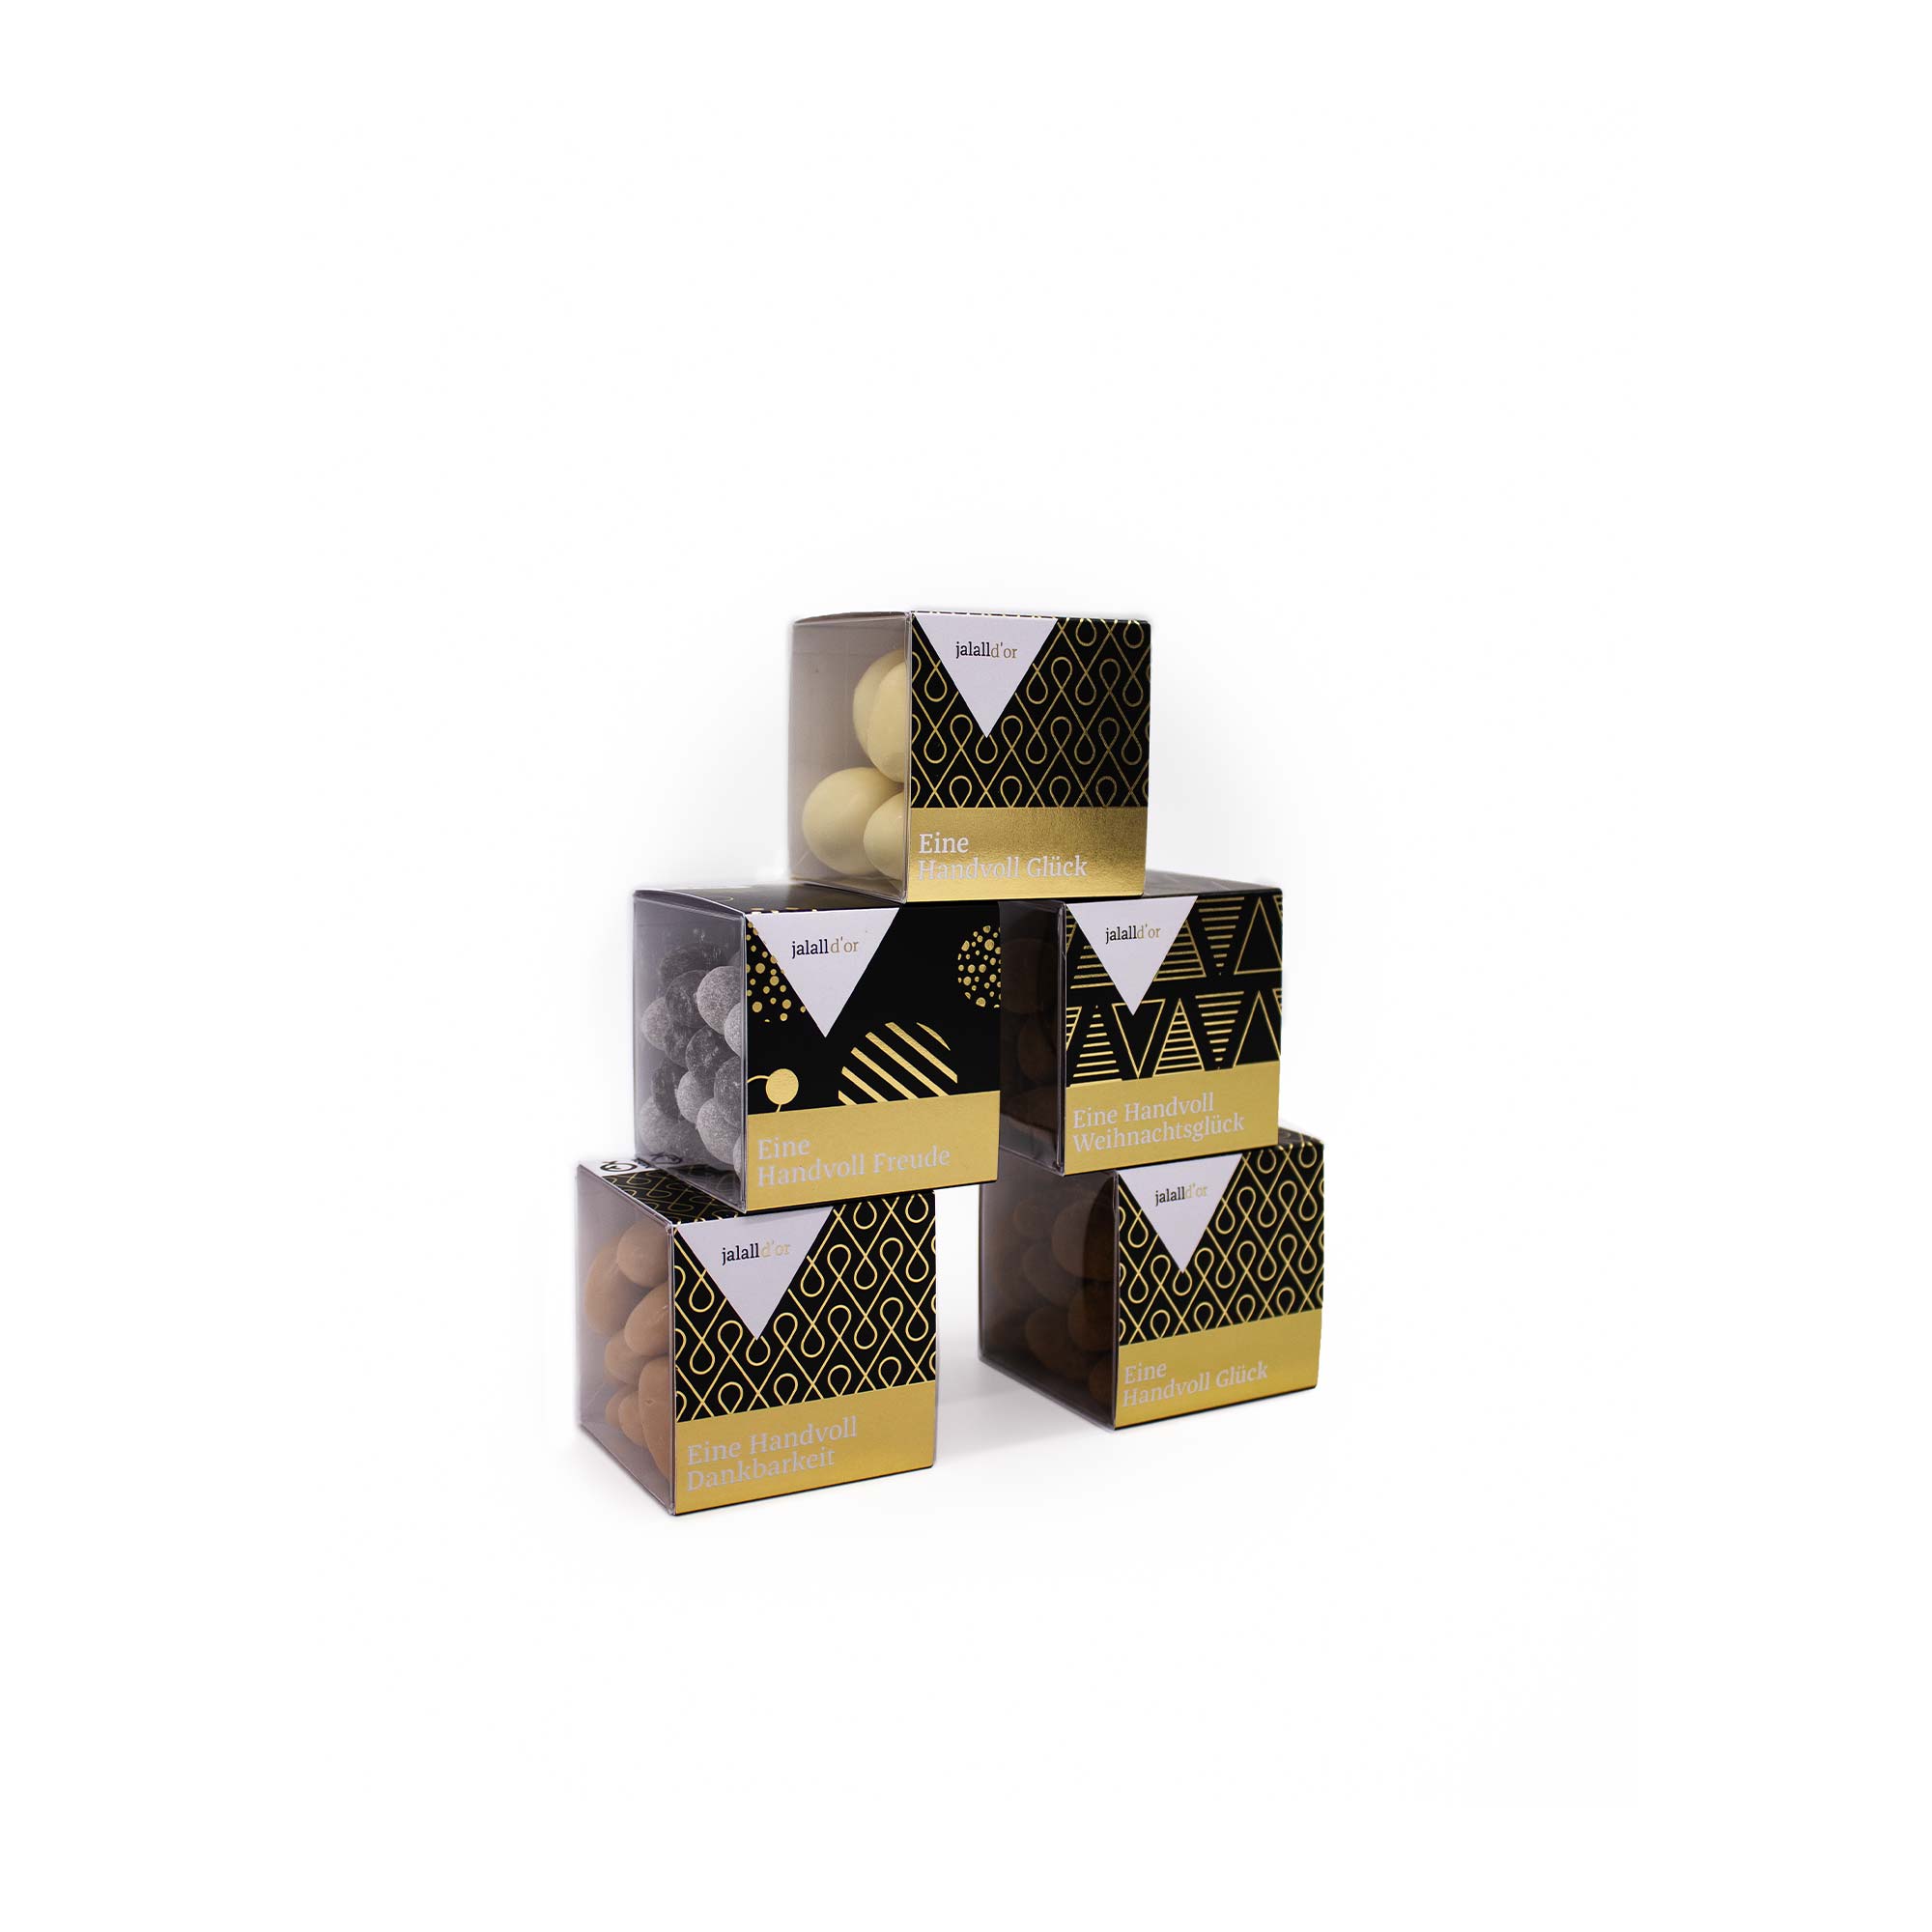 Jalall d'or Verpackungsdesign